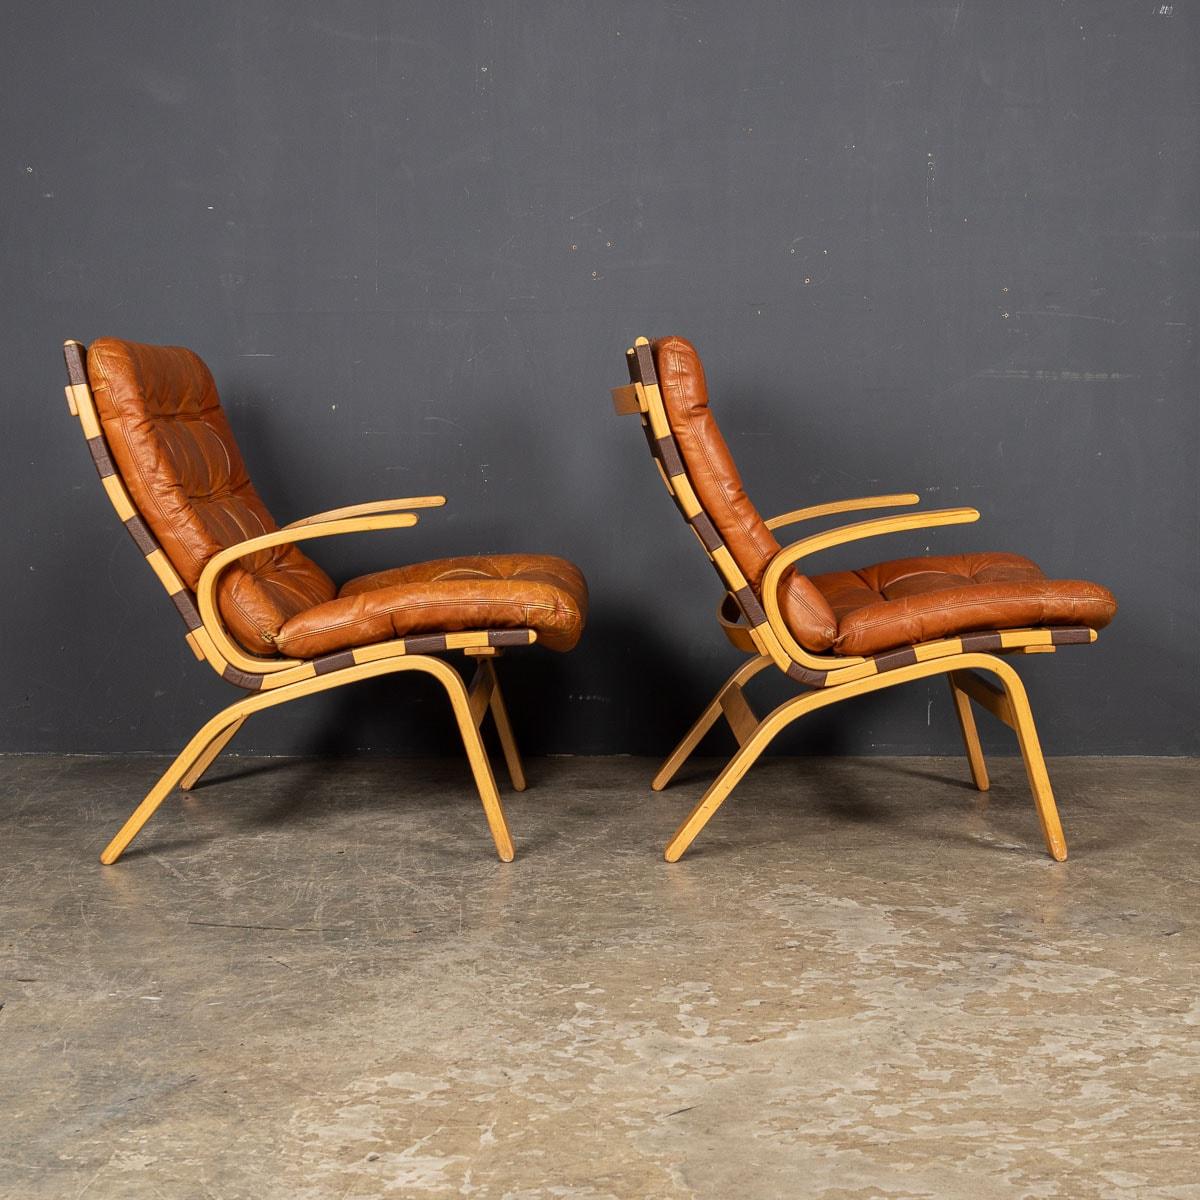 20th Century Danish Curved Beech Tan Leather Chairs By Farstrup Møbler, c.1970 4